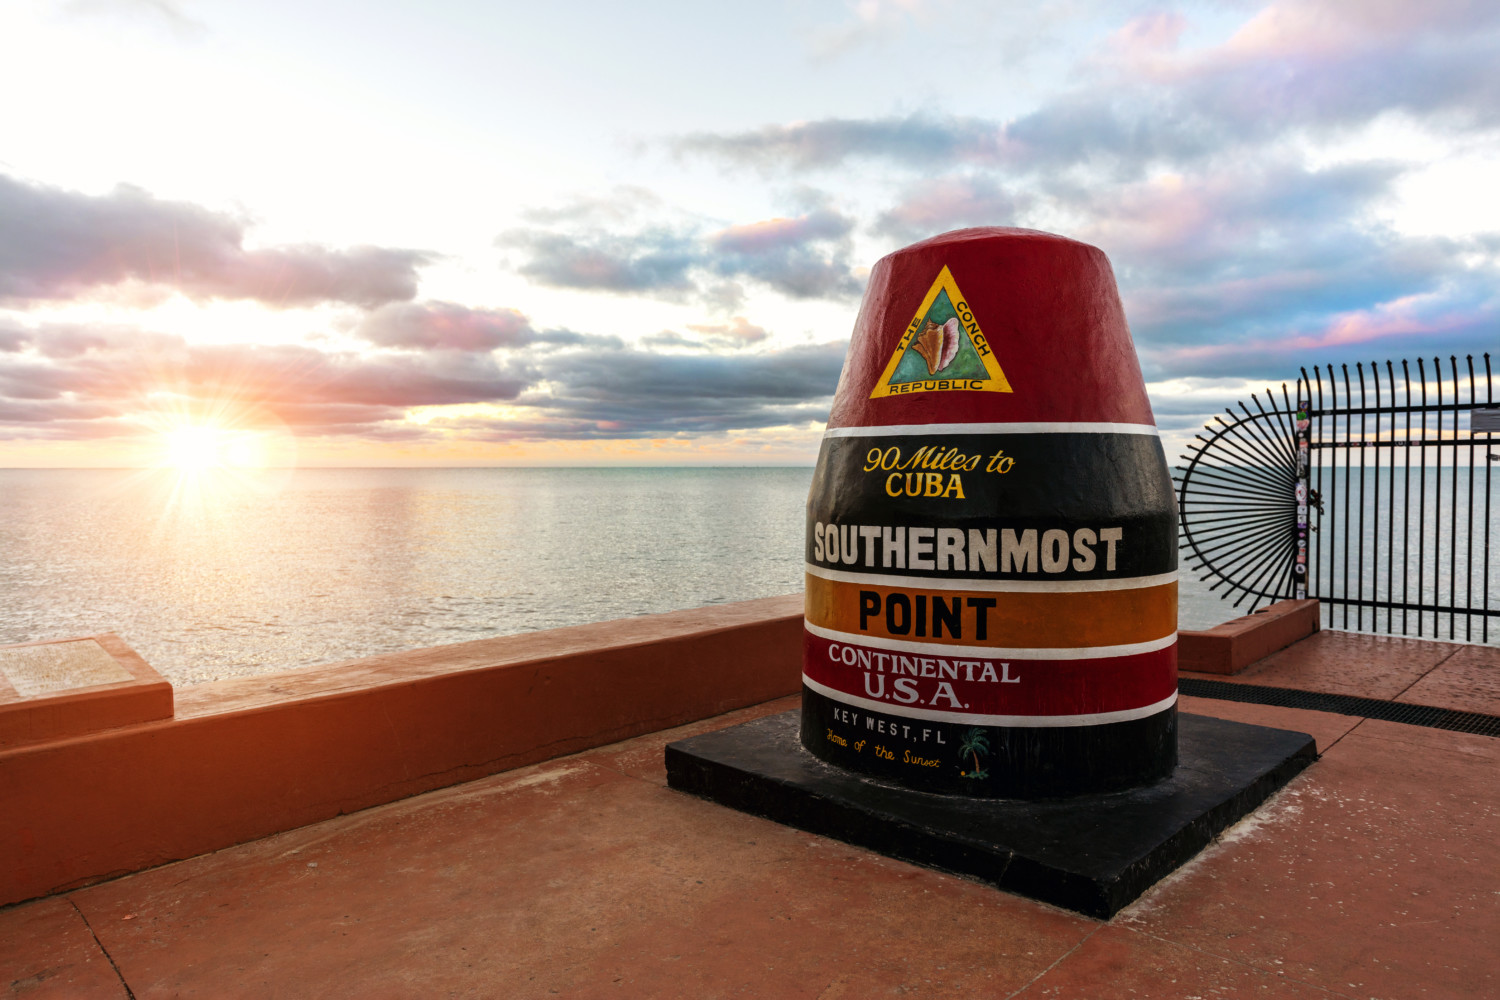 Key West, Florida, the southernmost point in the continental United States